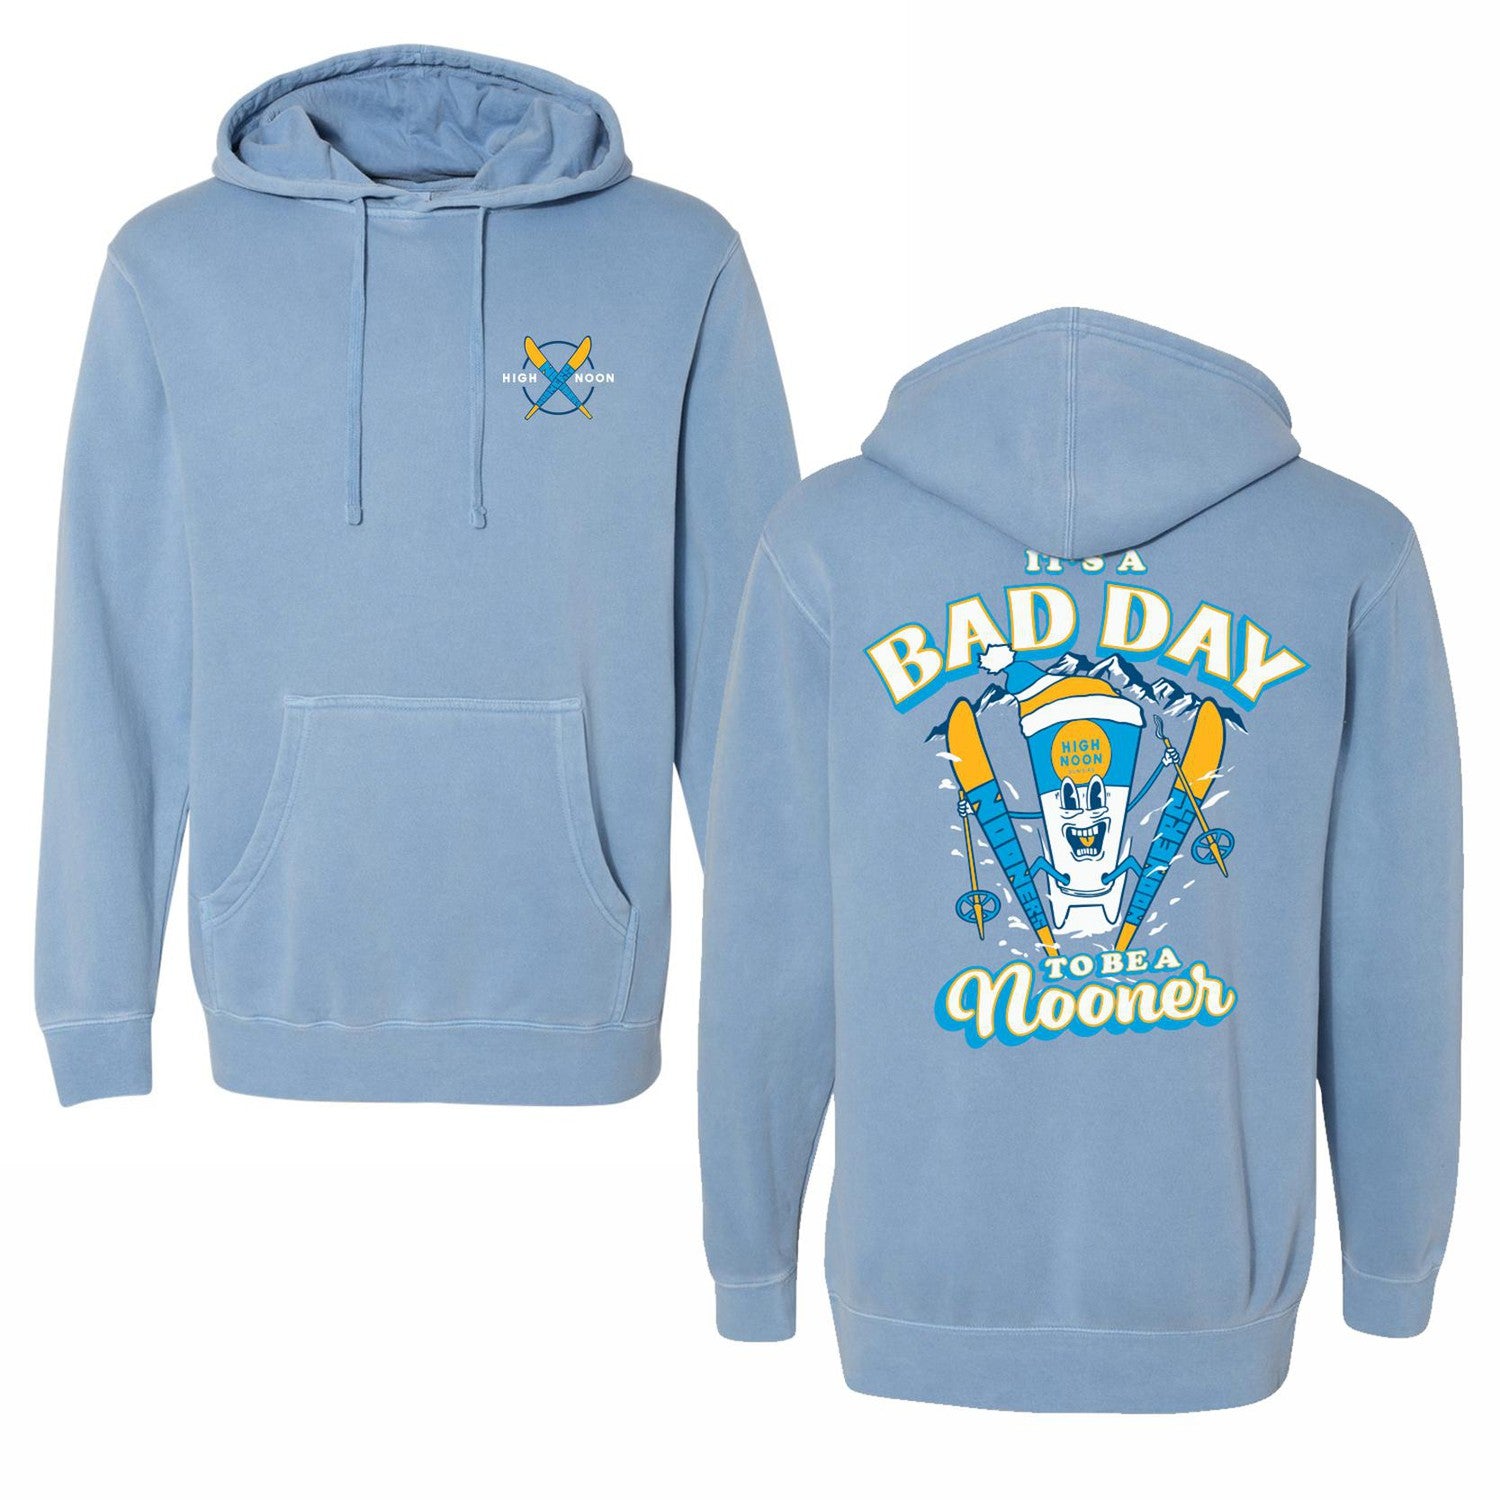 Bad Day To Be A Nooner Ski Club Pigment Dyed Hoodie